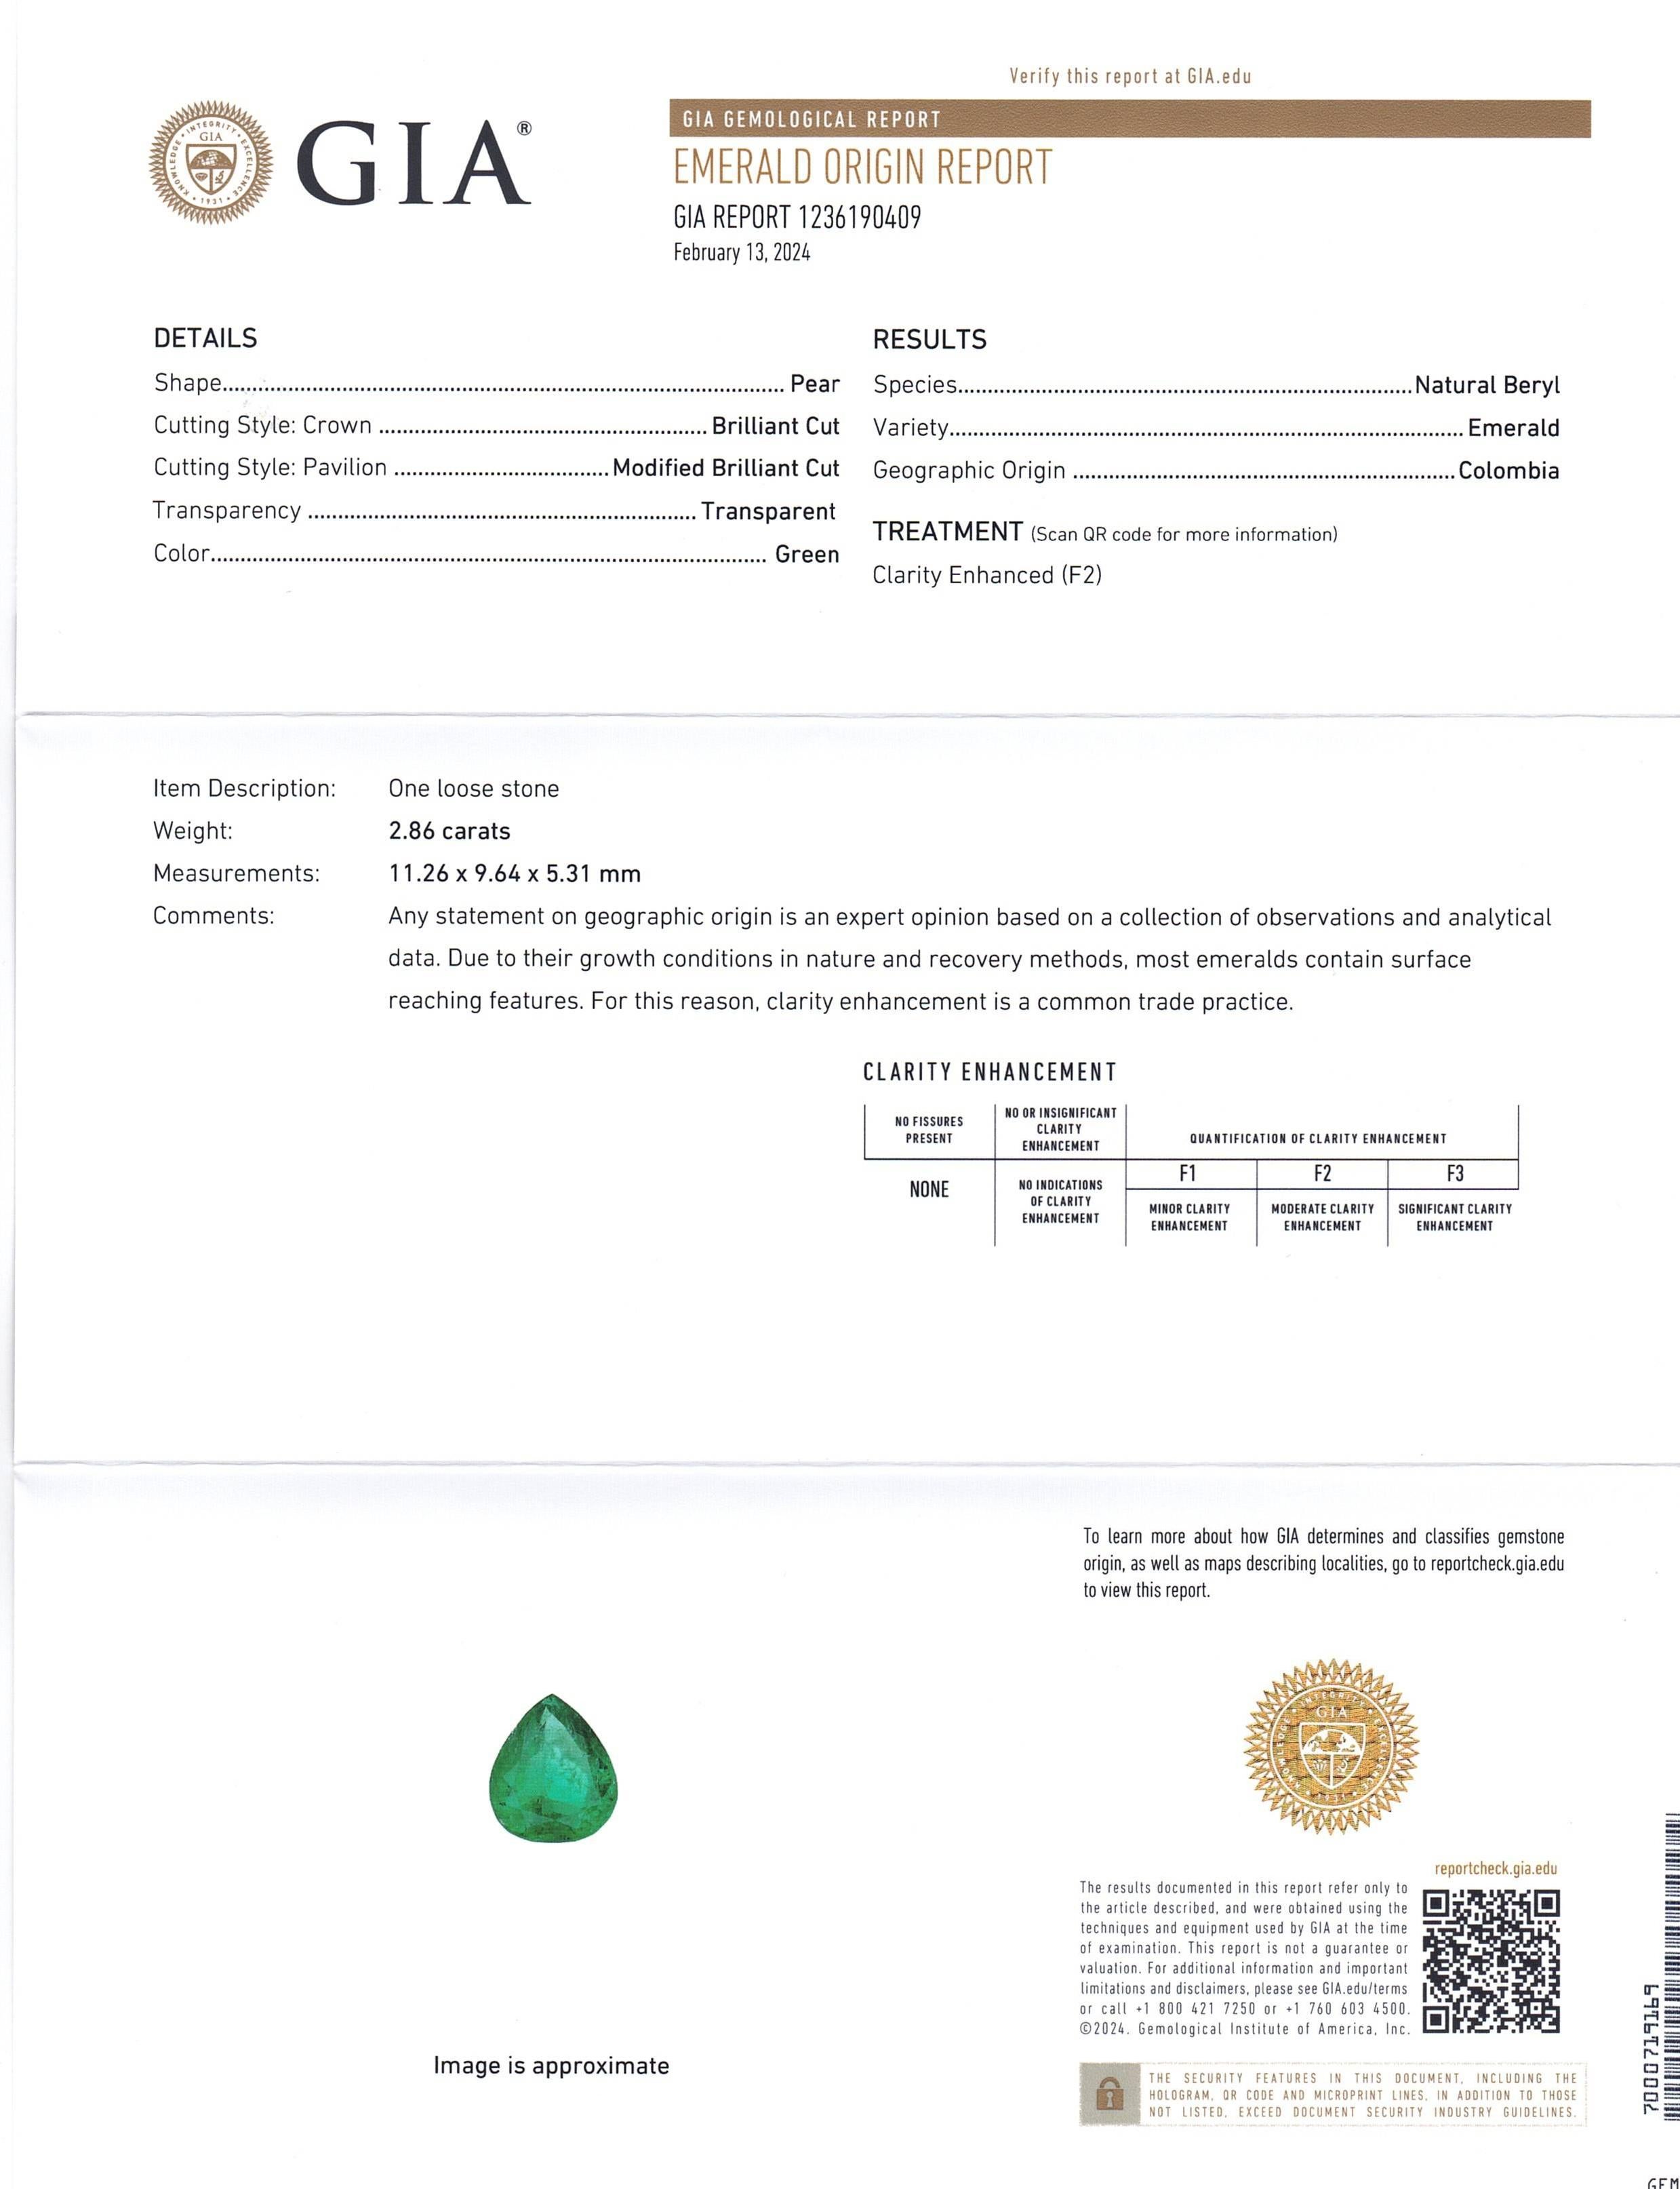 This is a stunning GIA Certified Emerald 


The GIA report reads as follows:

GIA Report Number: 1236190409
Shape: Pear
Cutting Style: 
Cutting Style: Crown: Brilliant Cut
Cutting Style: Pavilion: Modified Brilliant Cut
Transparency: